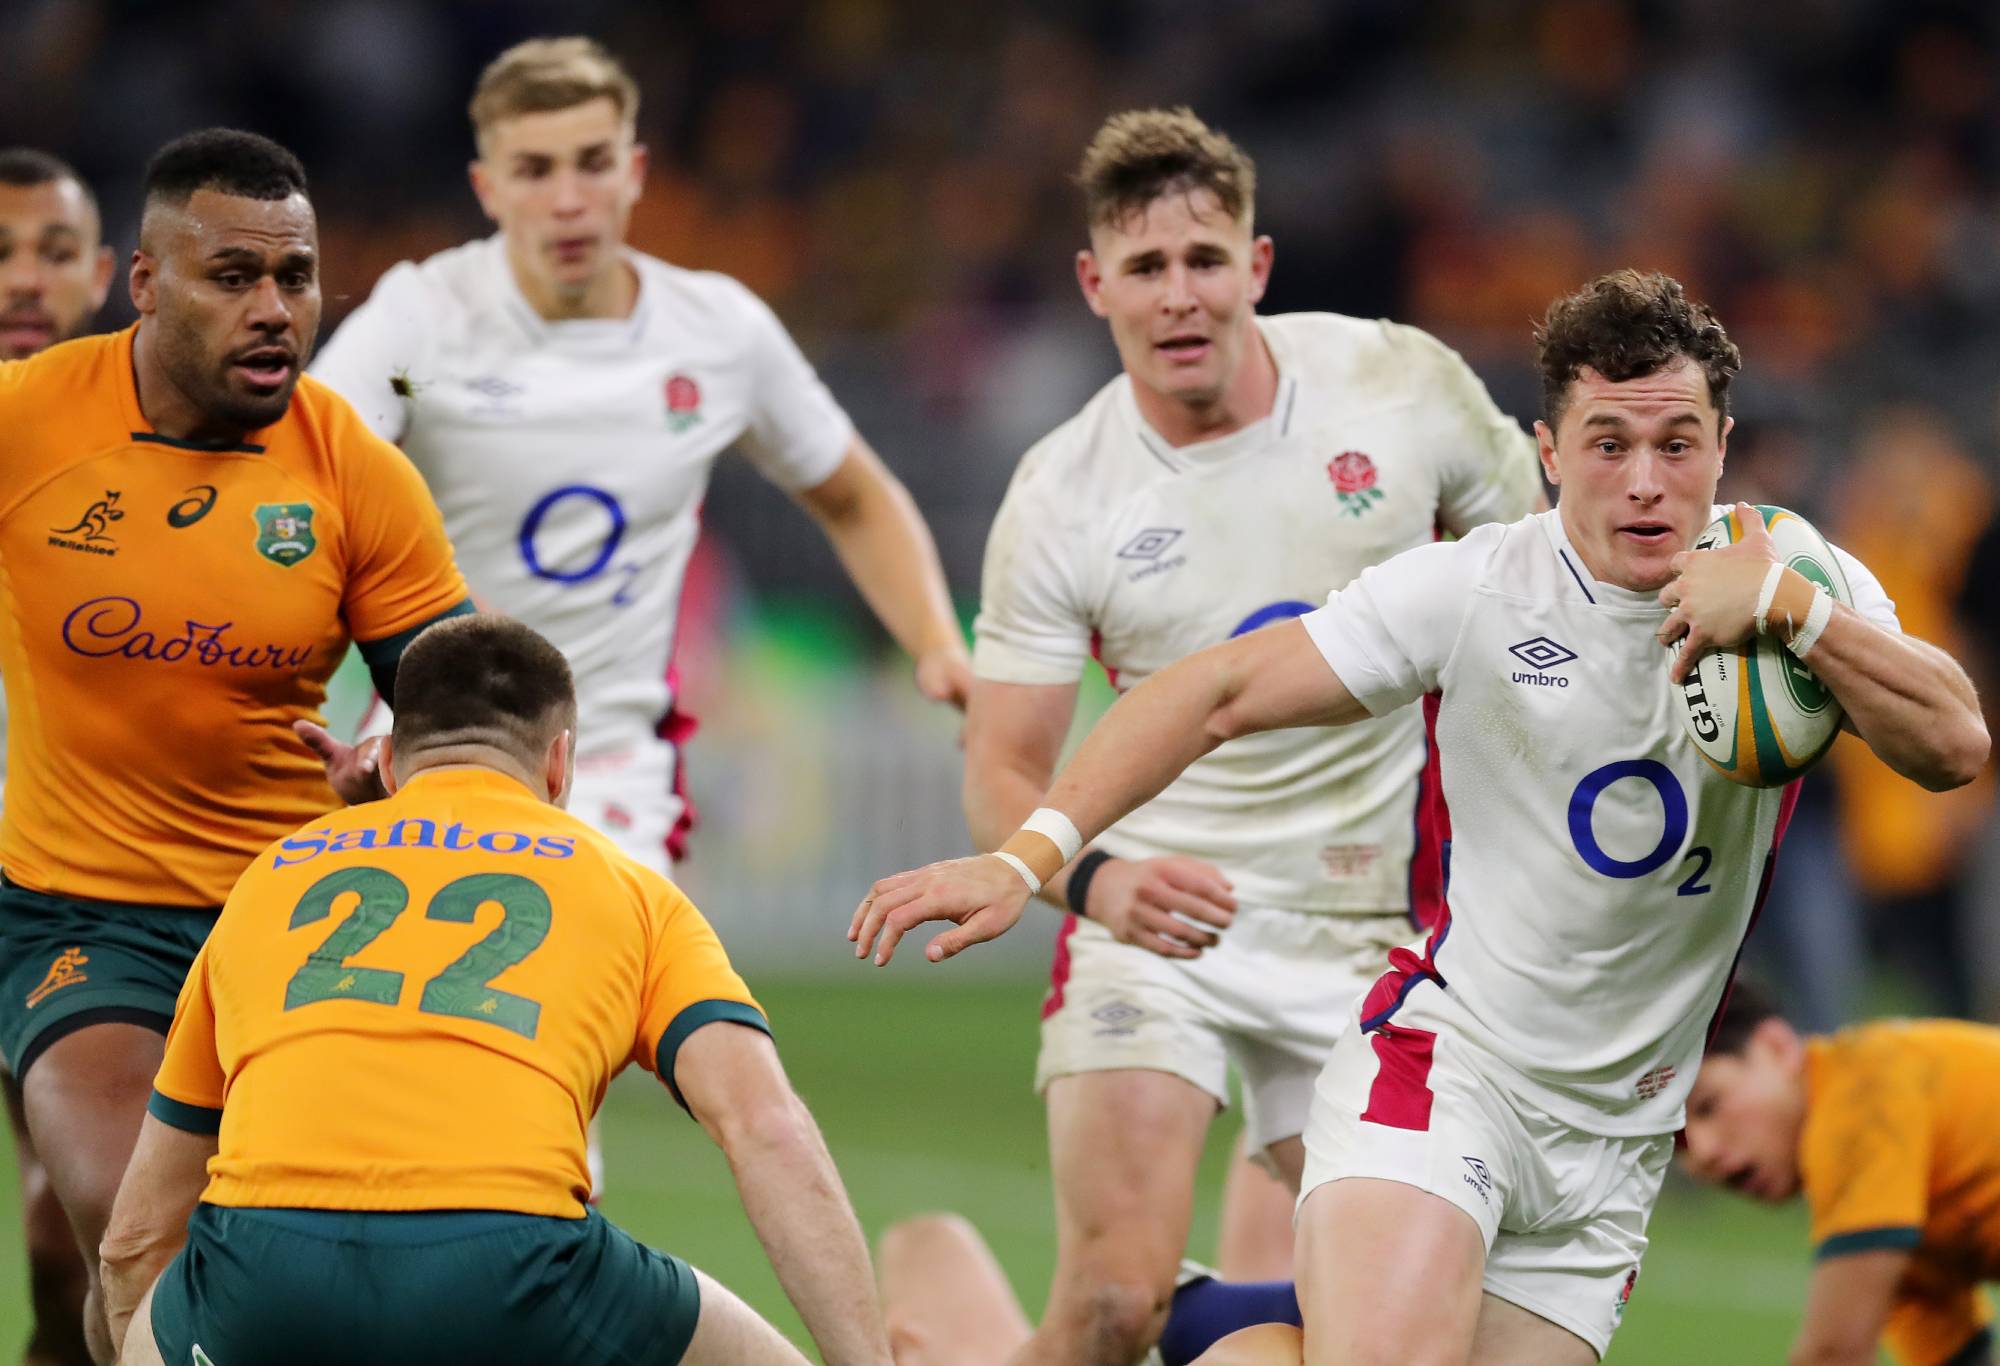 Henry Arundell of England runs to score a scores a try during game one of the international test match series between the Australian Wallabies and England at Optus Stadium on July 02, 2022 in Perth, Australia. (Photo by Will Russell - RFU/The RFU Collection via Getty Images)